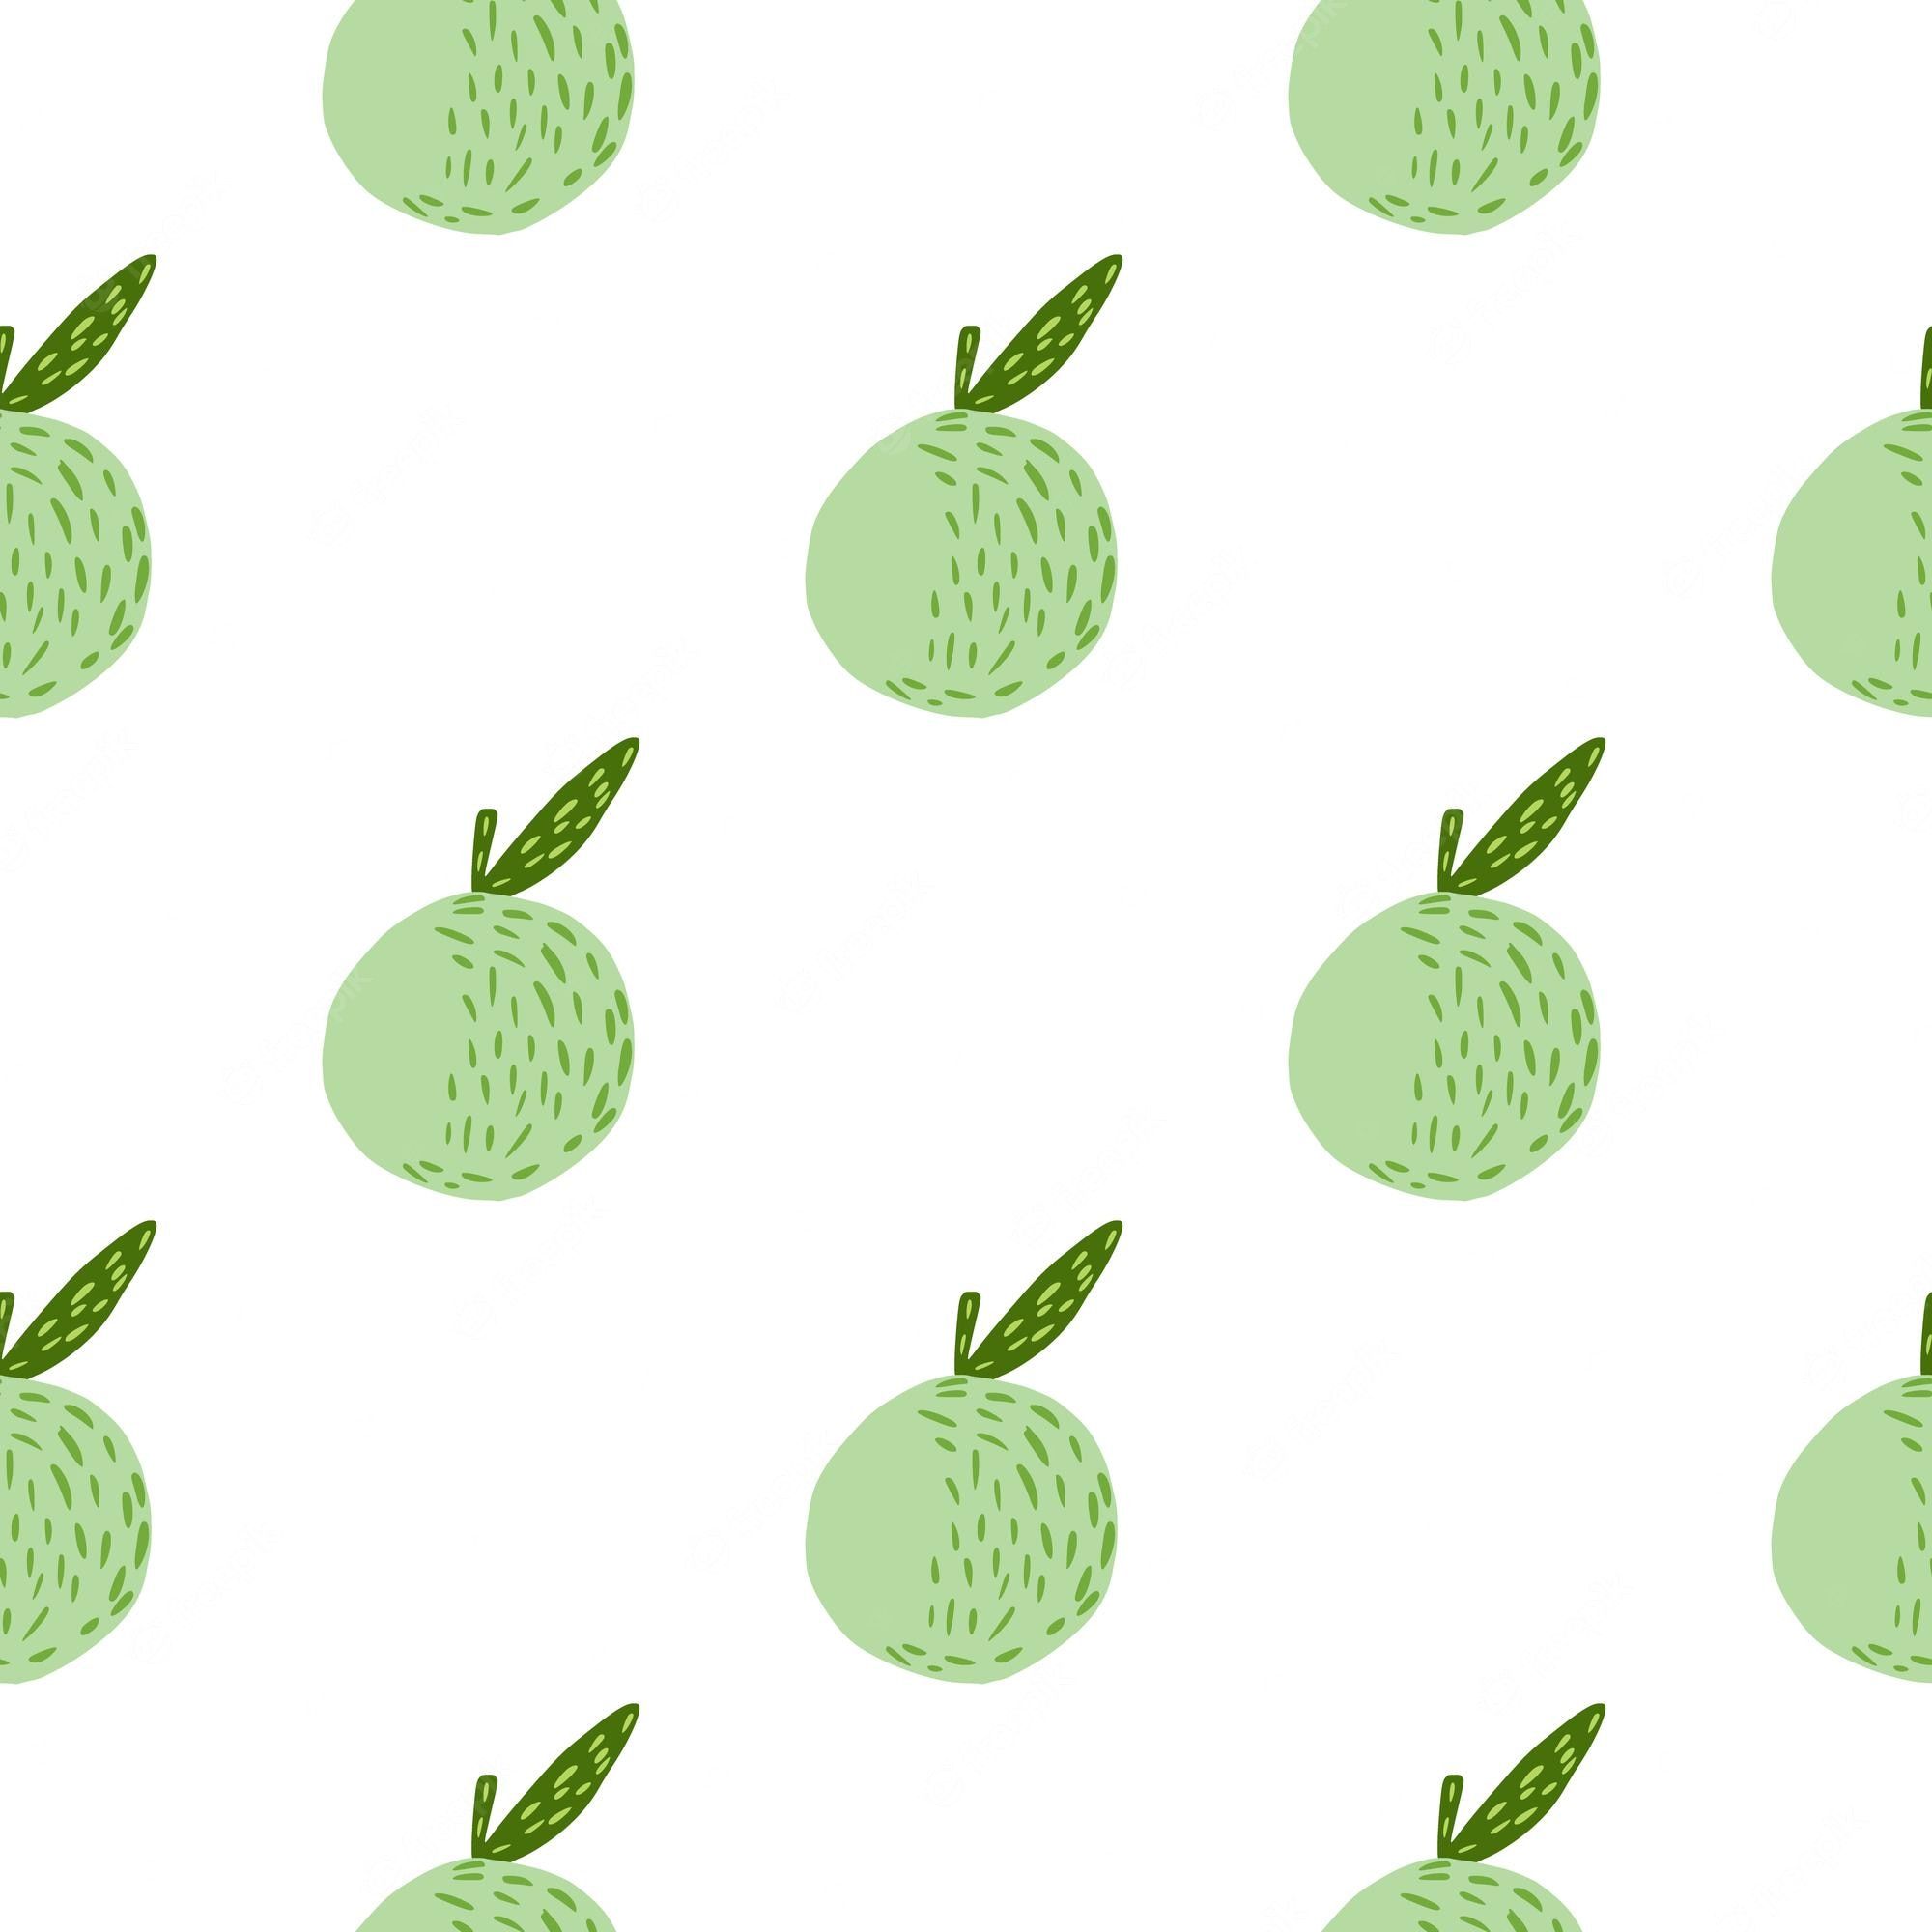 Premium Vector. Isolated seamless fruit pattern with green pastel apple silhouettes. white background. healthy food print. flat vector print for textile, fabric, giftwrap, wallpaper. endless illustration